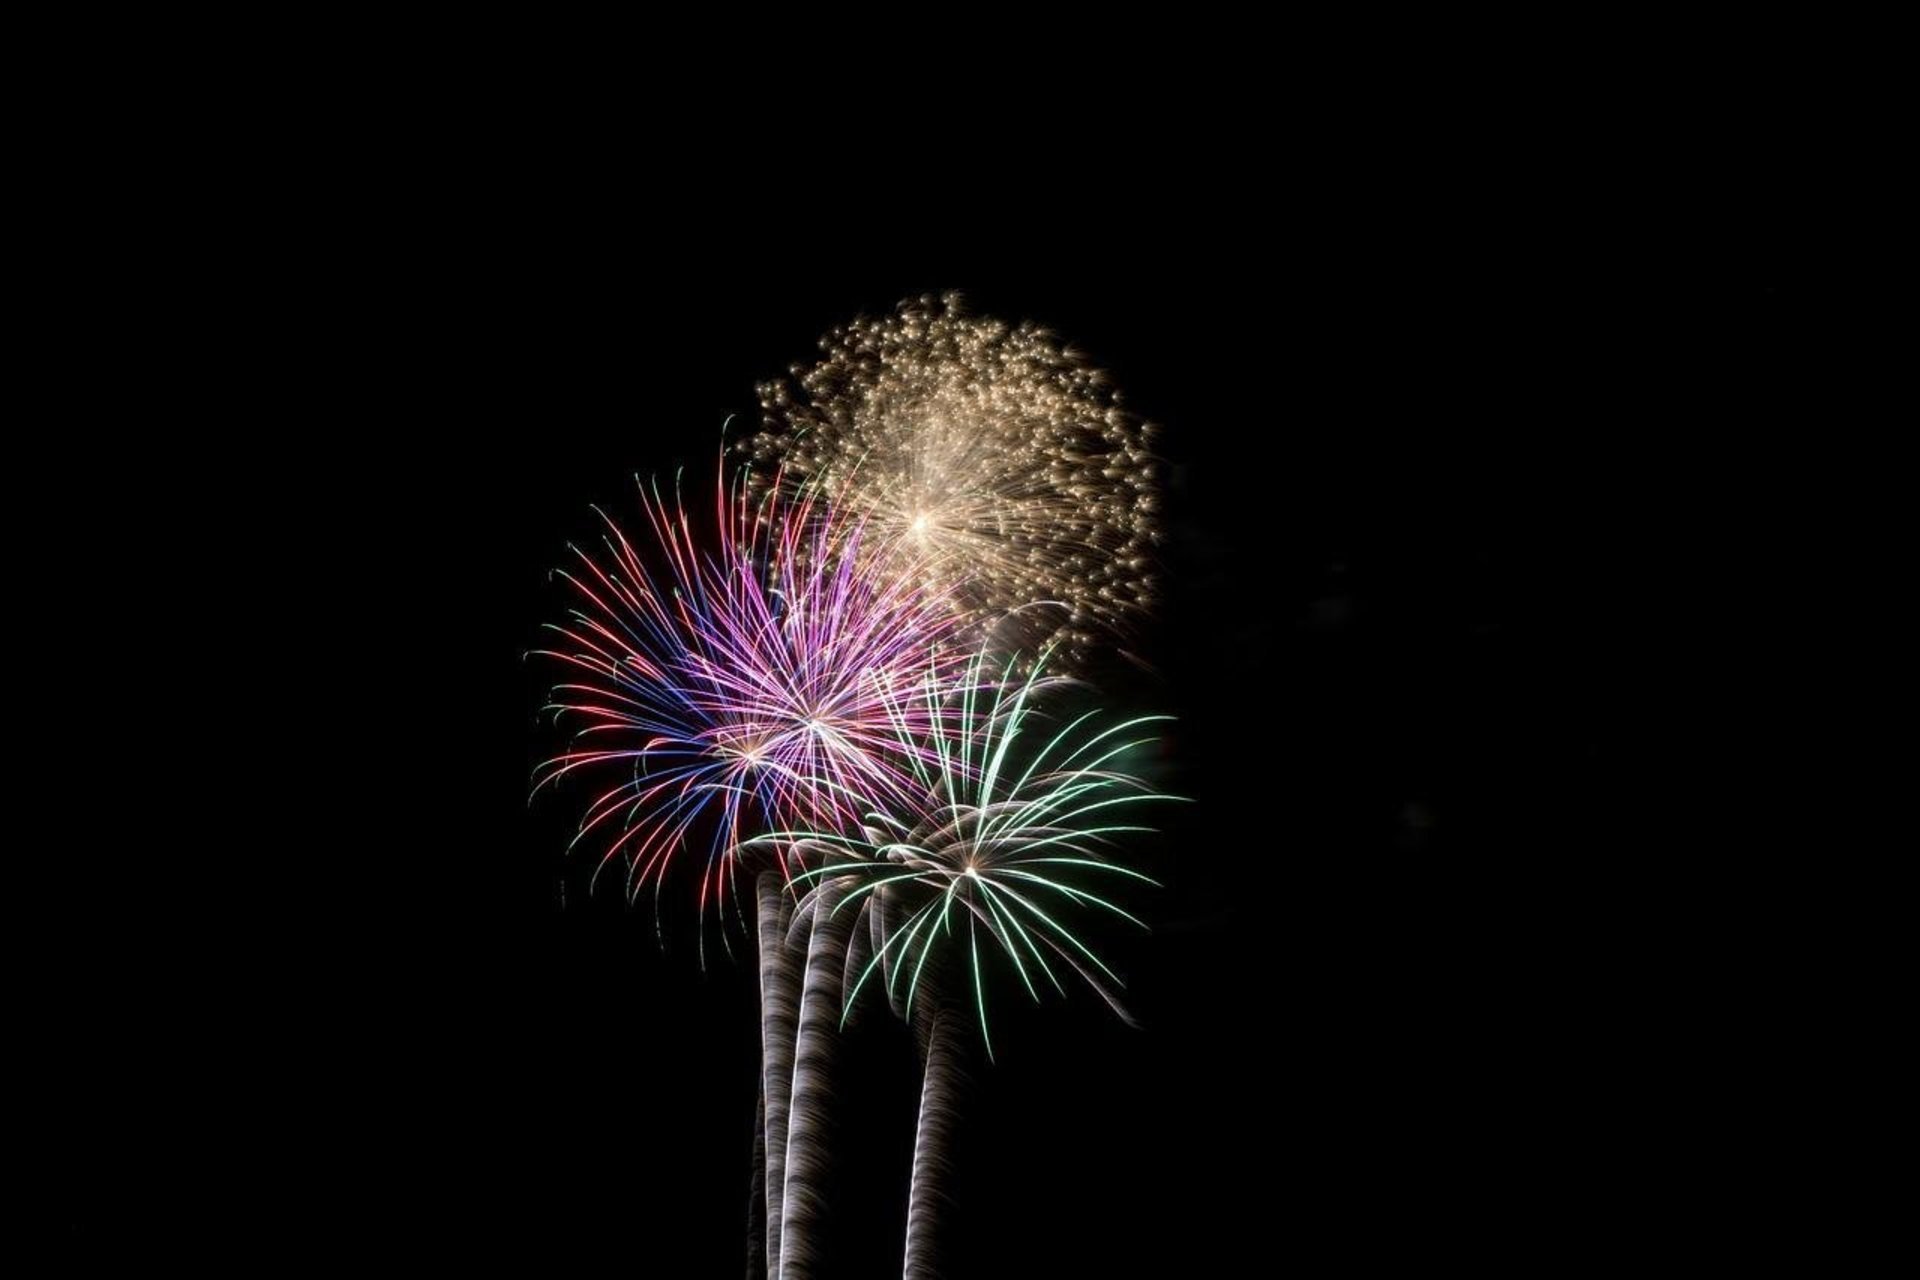 Fond du Lac 4th of July Events & Fireworks